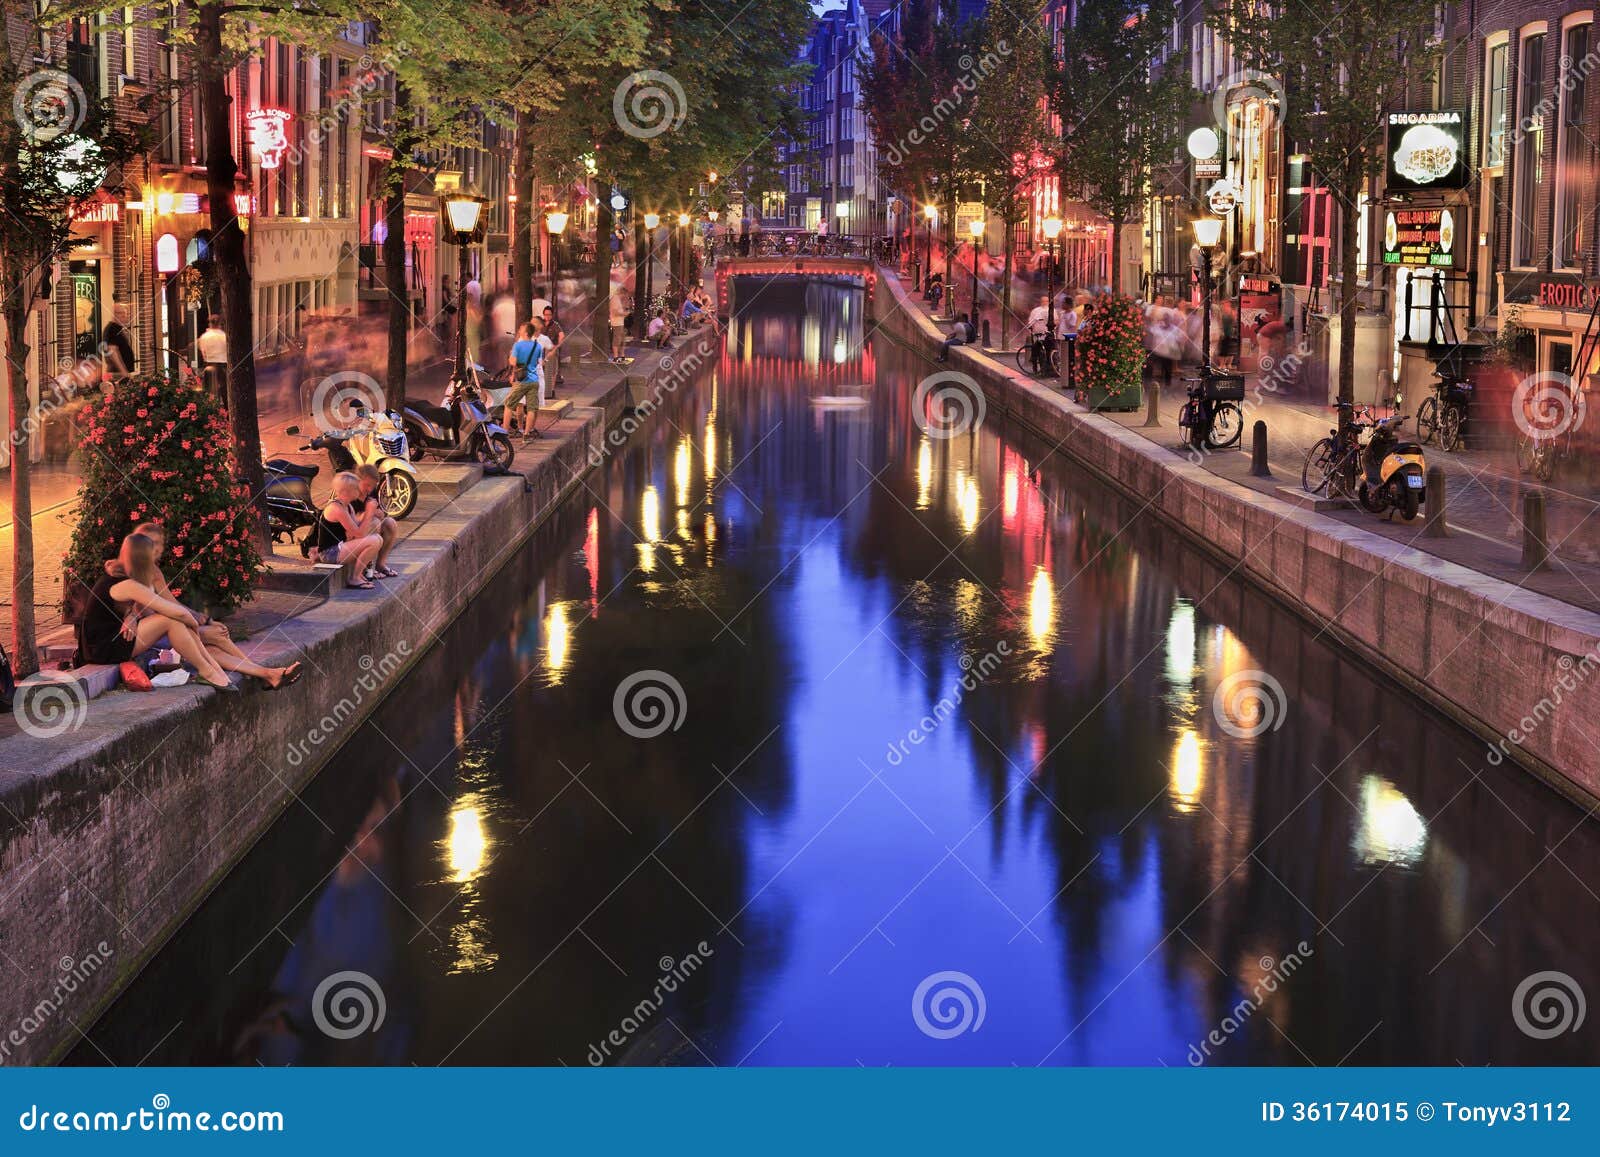 Red Light District Amsterdam - Image city, capital: 36174015